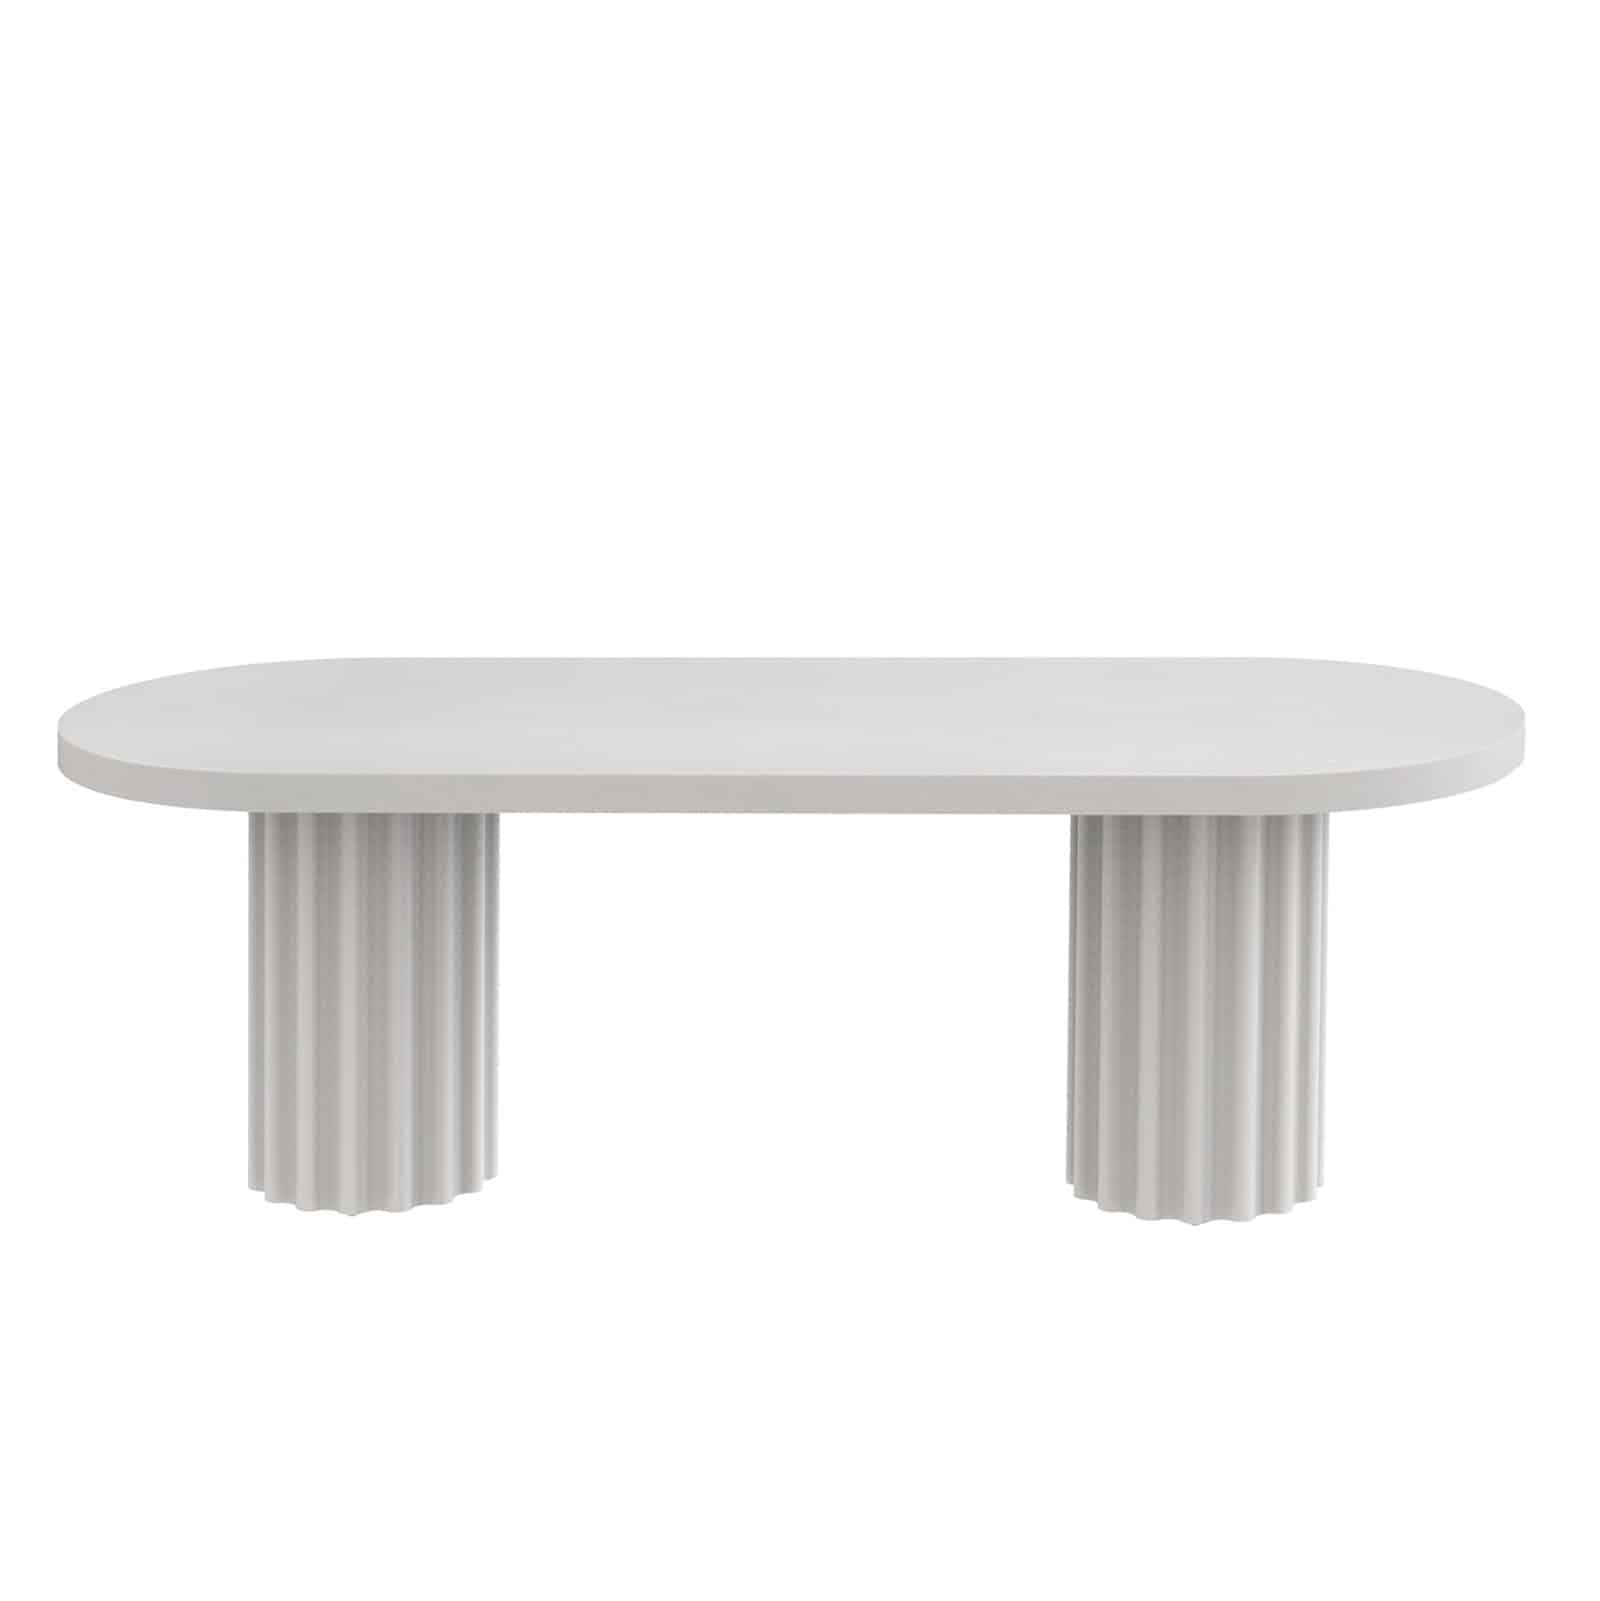 web-Truffle-Oval-Dining-Table-2400x900x760mm-(1)